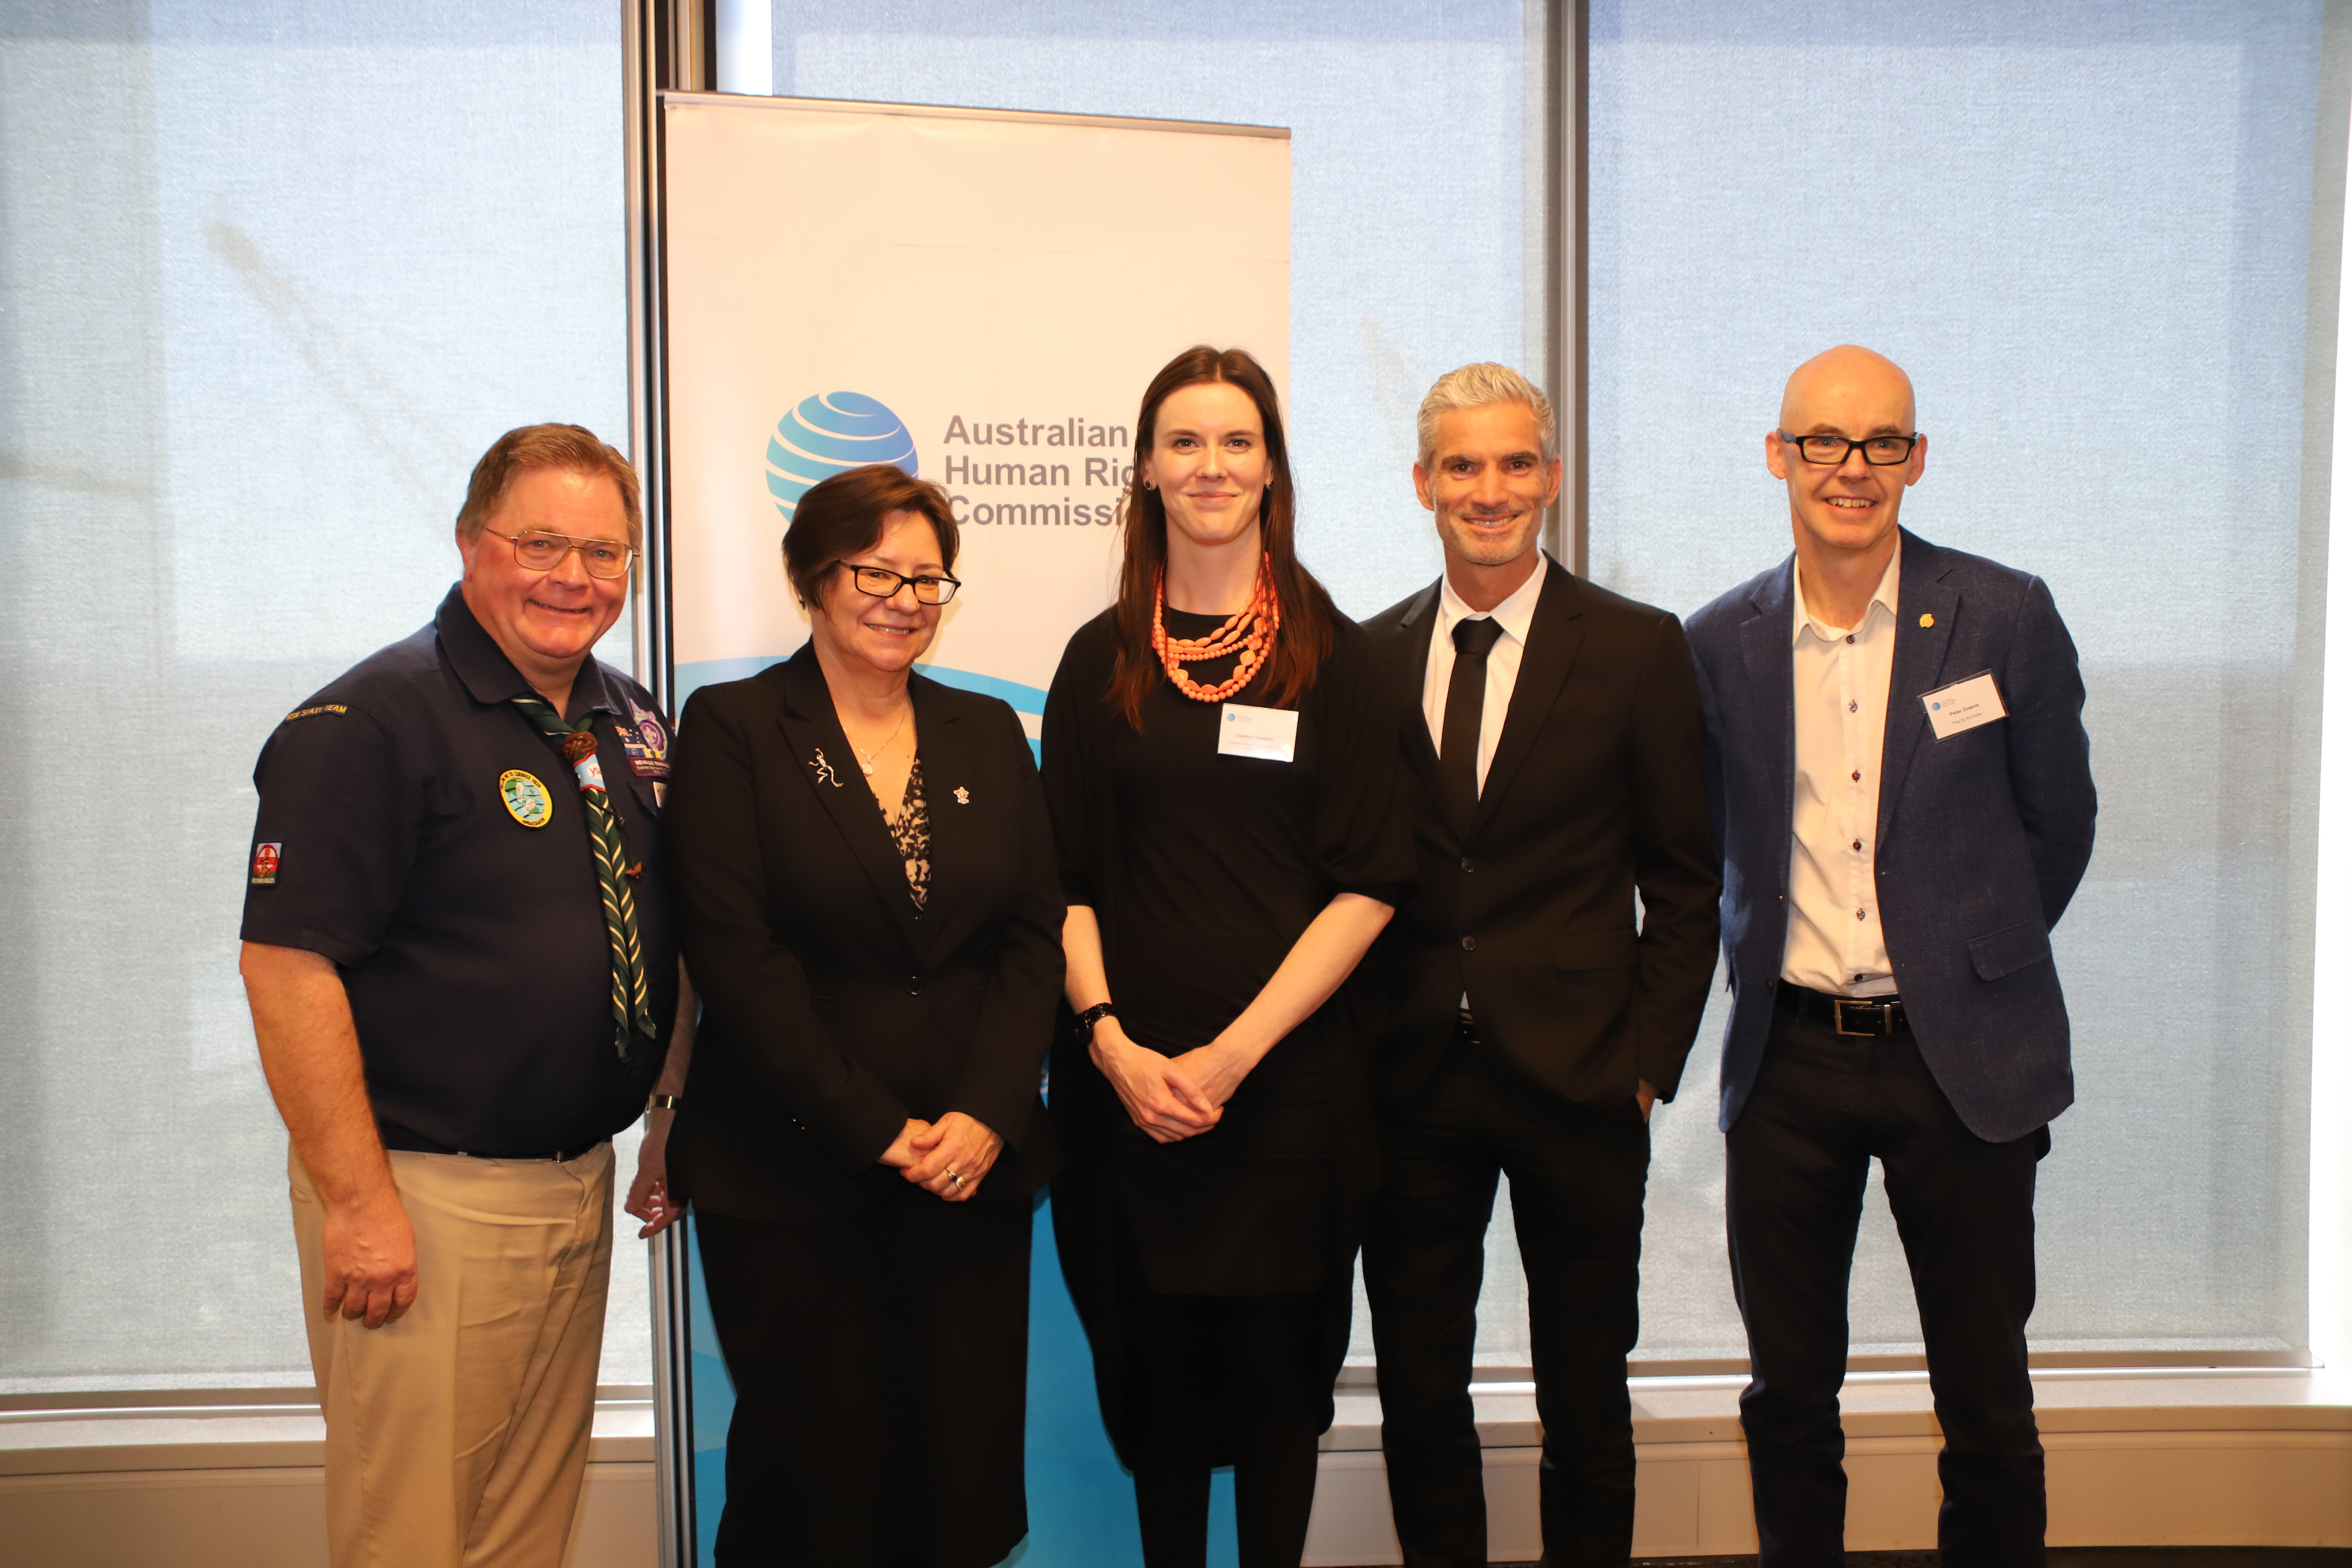 Megan Mitchell with speakers at launch event